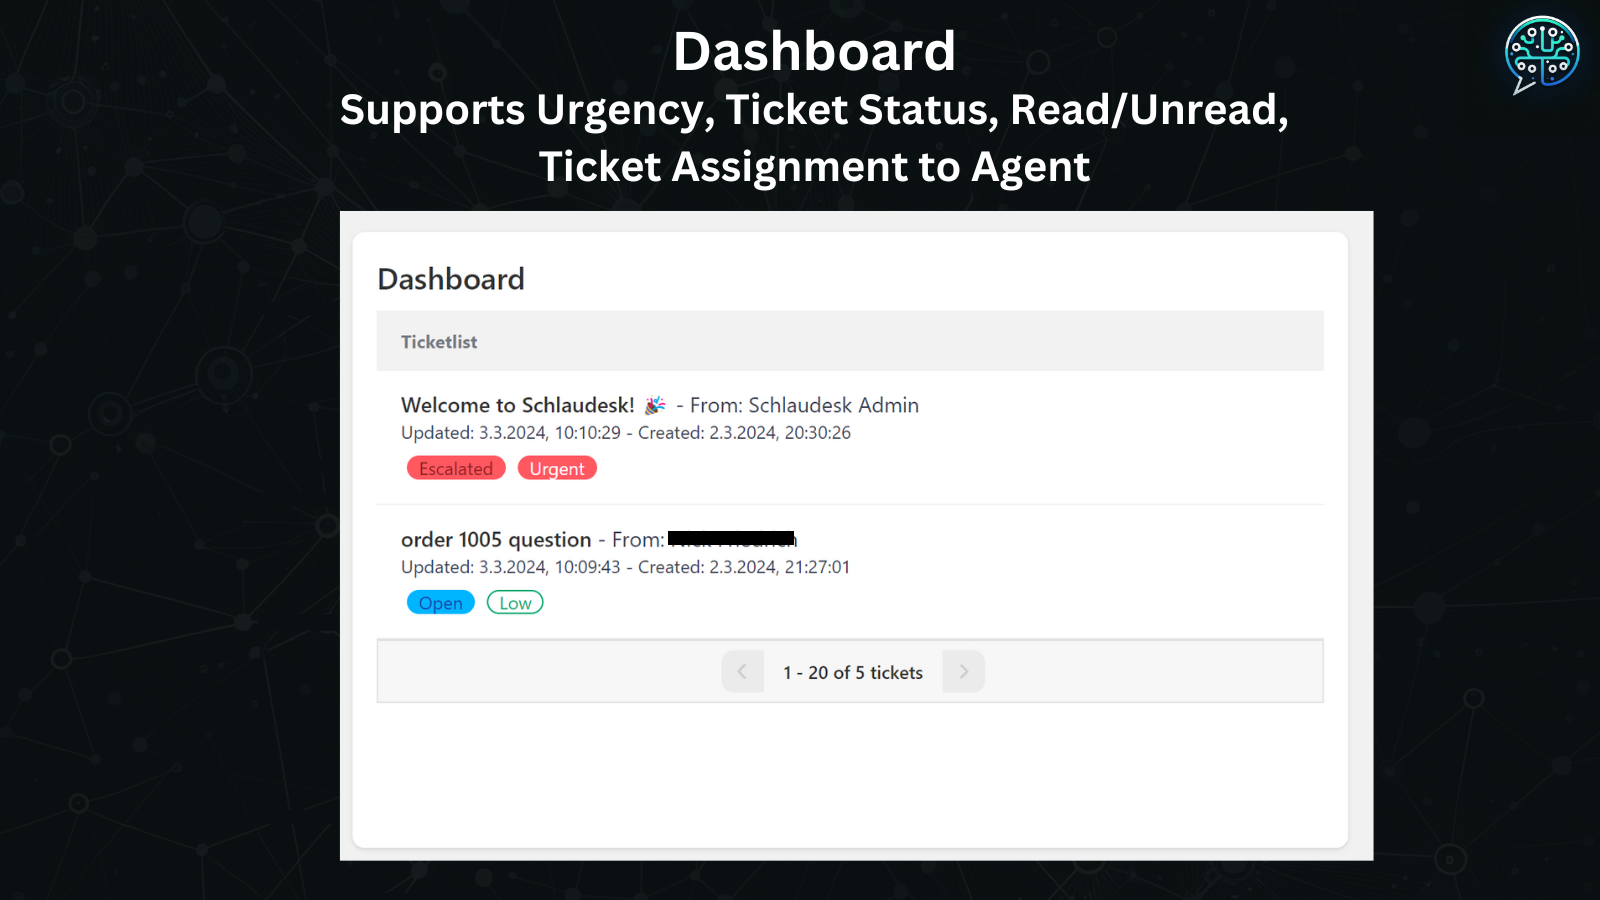 Supports urgency, agents, status, read unread tickets